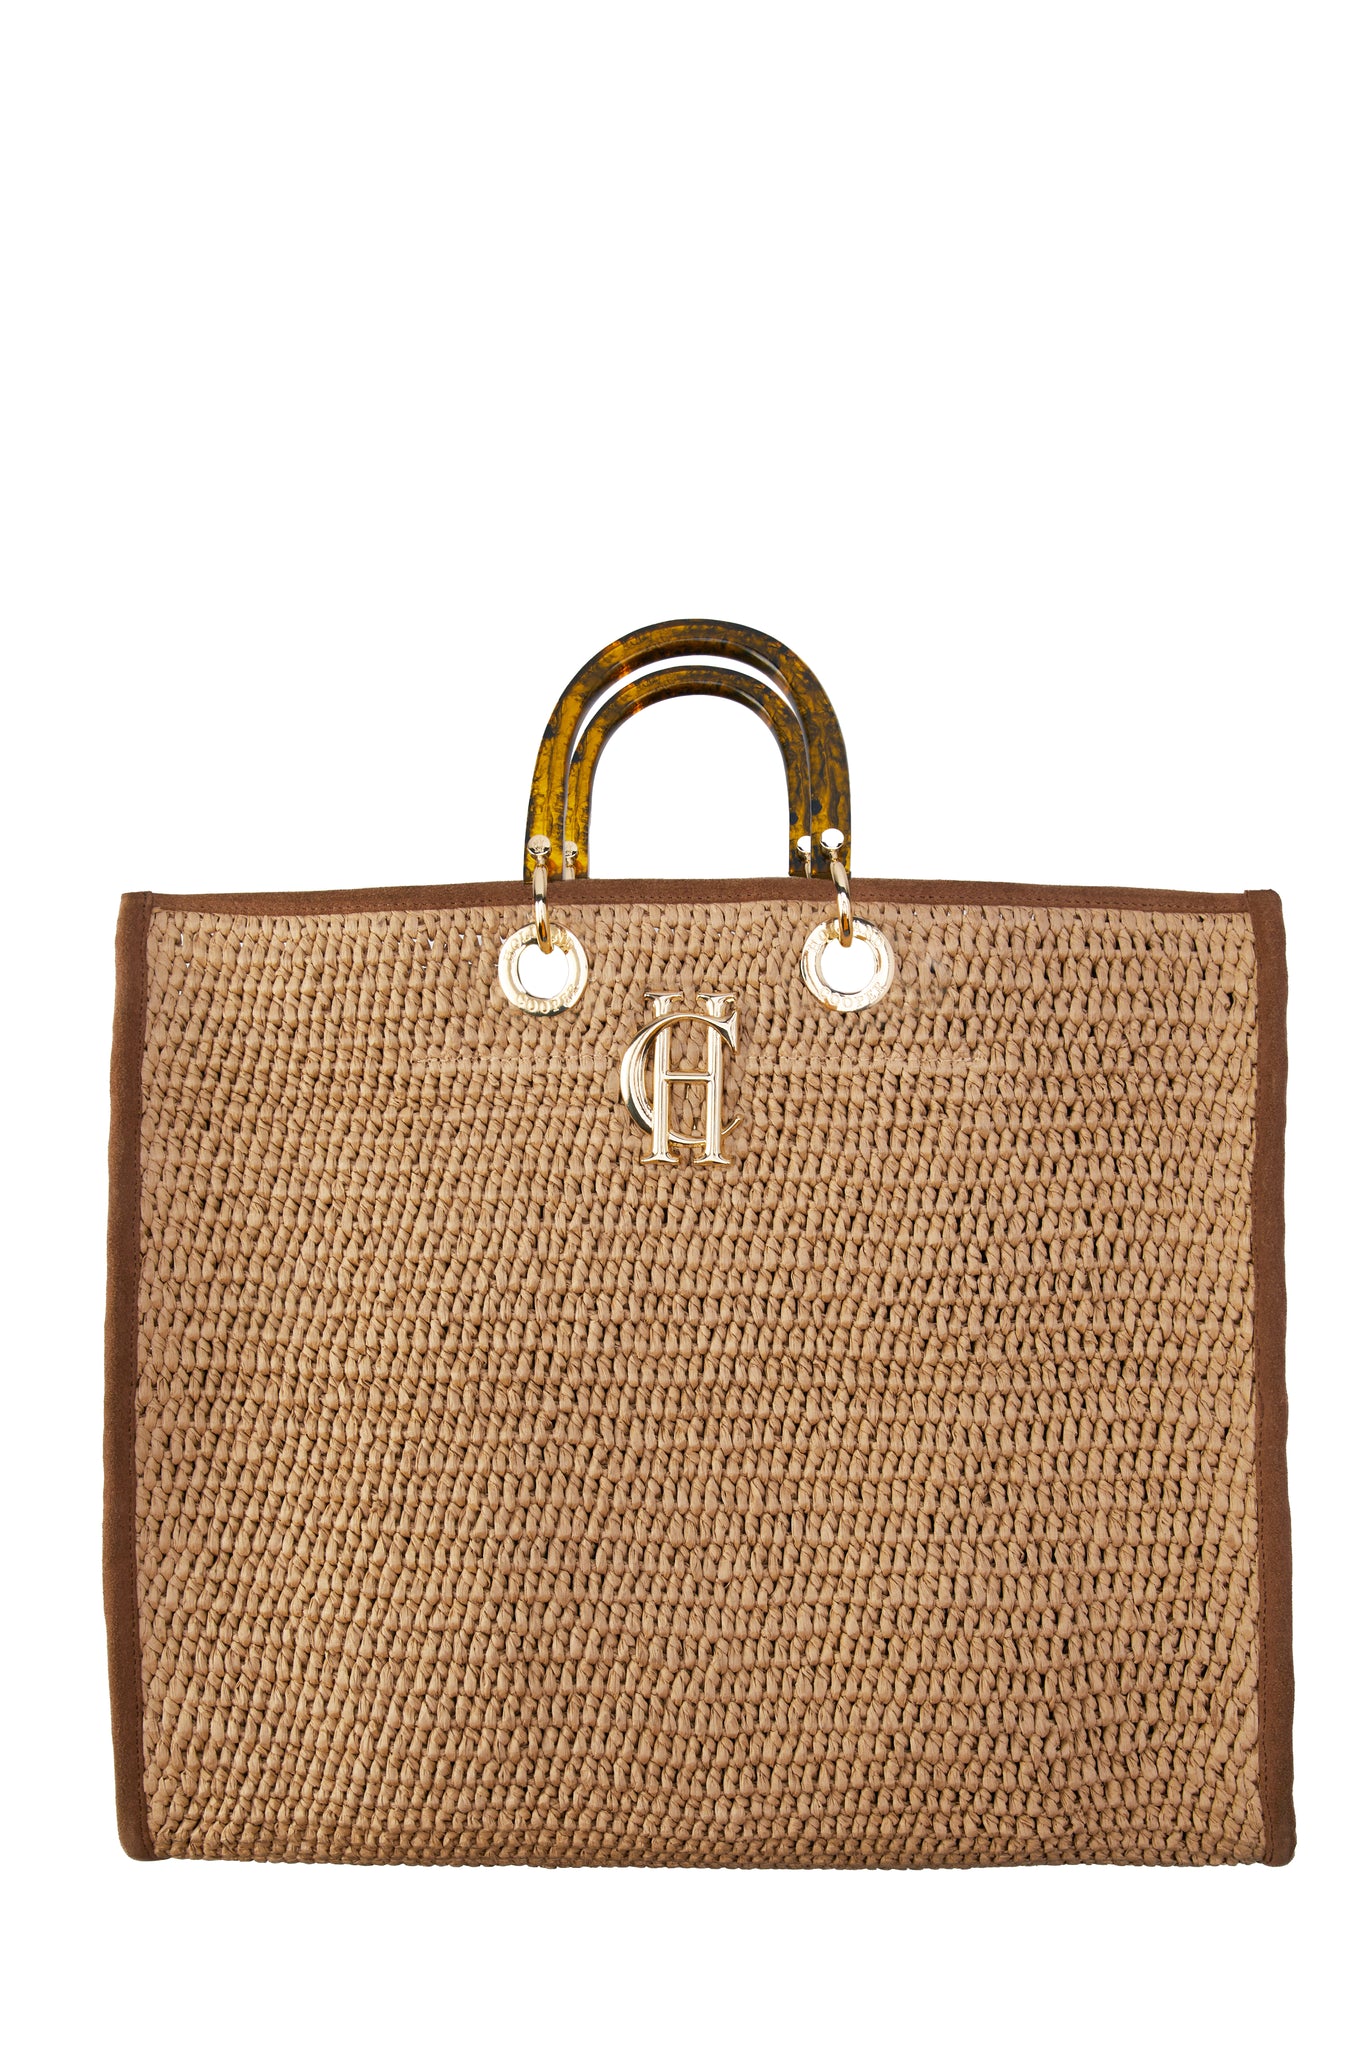 womens natural raffia tote bag with gold hardware details and Tortoiseshell acrylic top handle